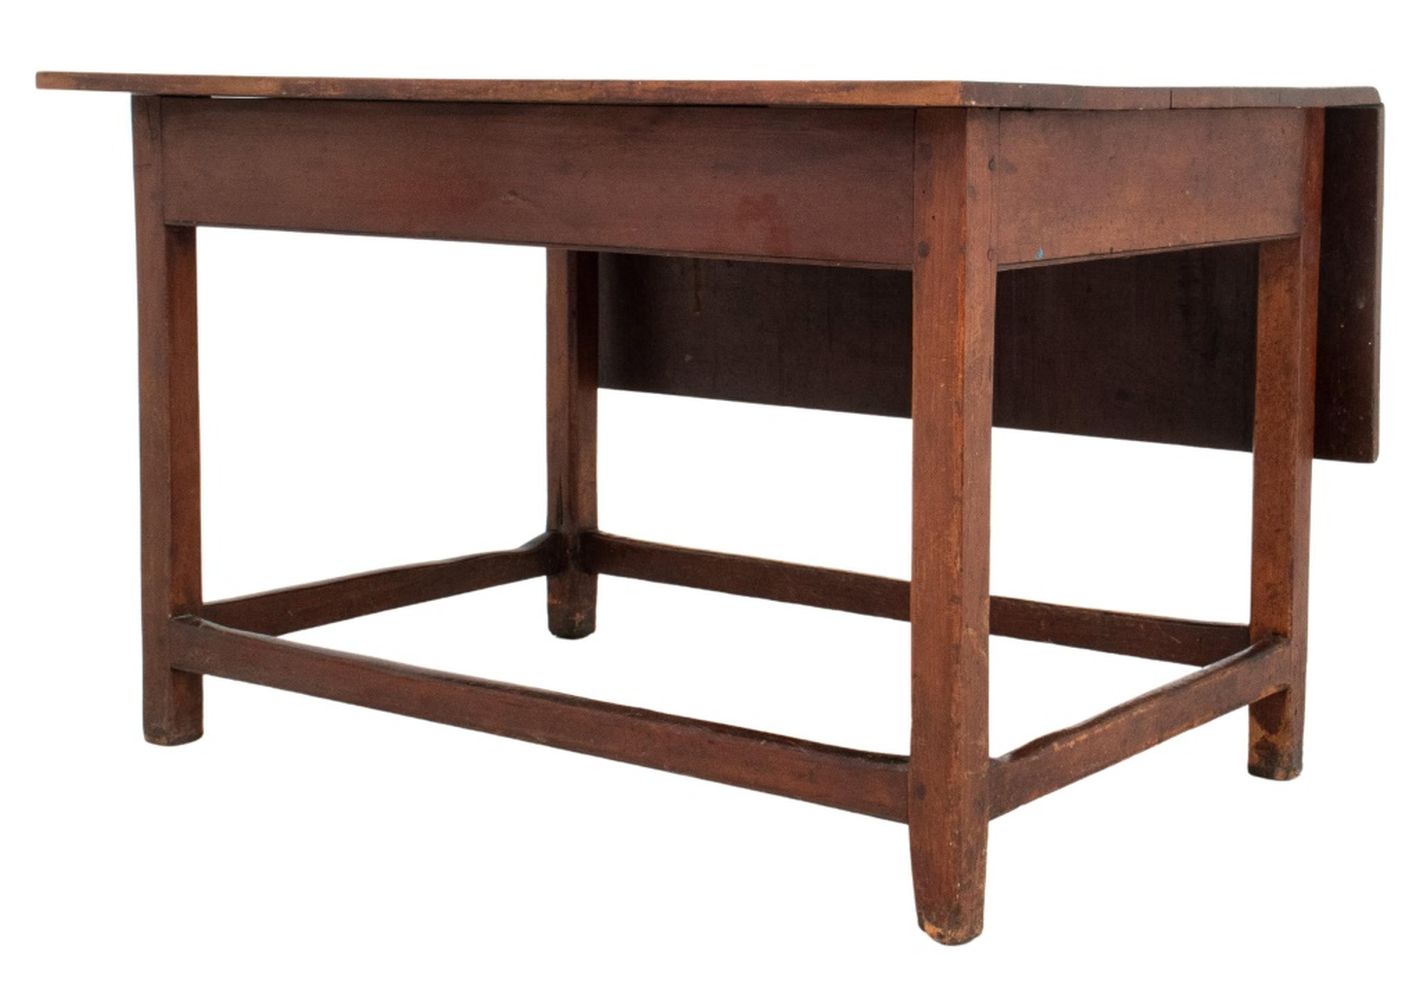 COUNTRY DROP LEAF TABLE 20TH C  3b4c84